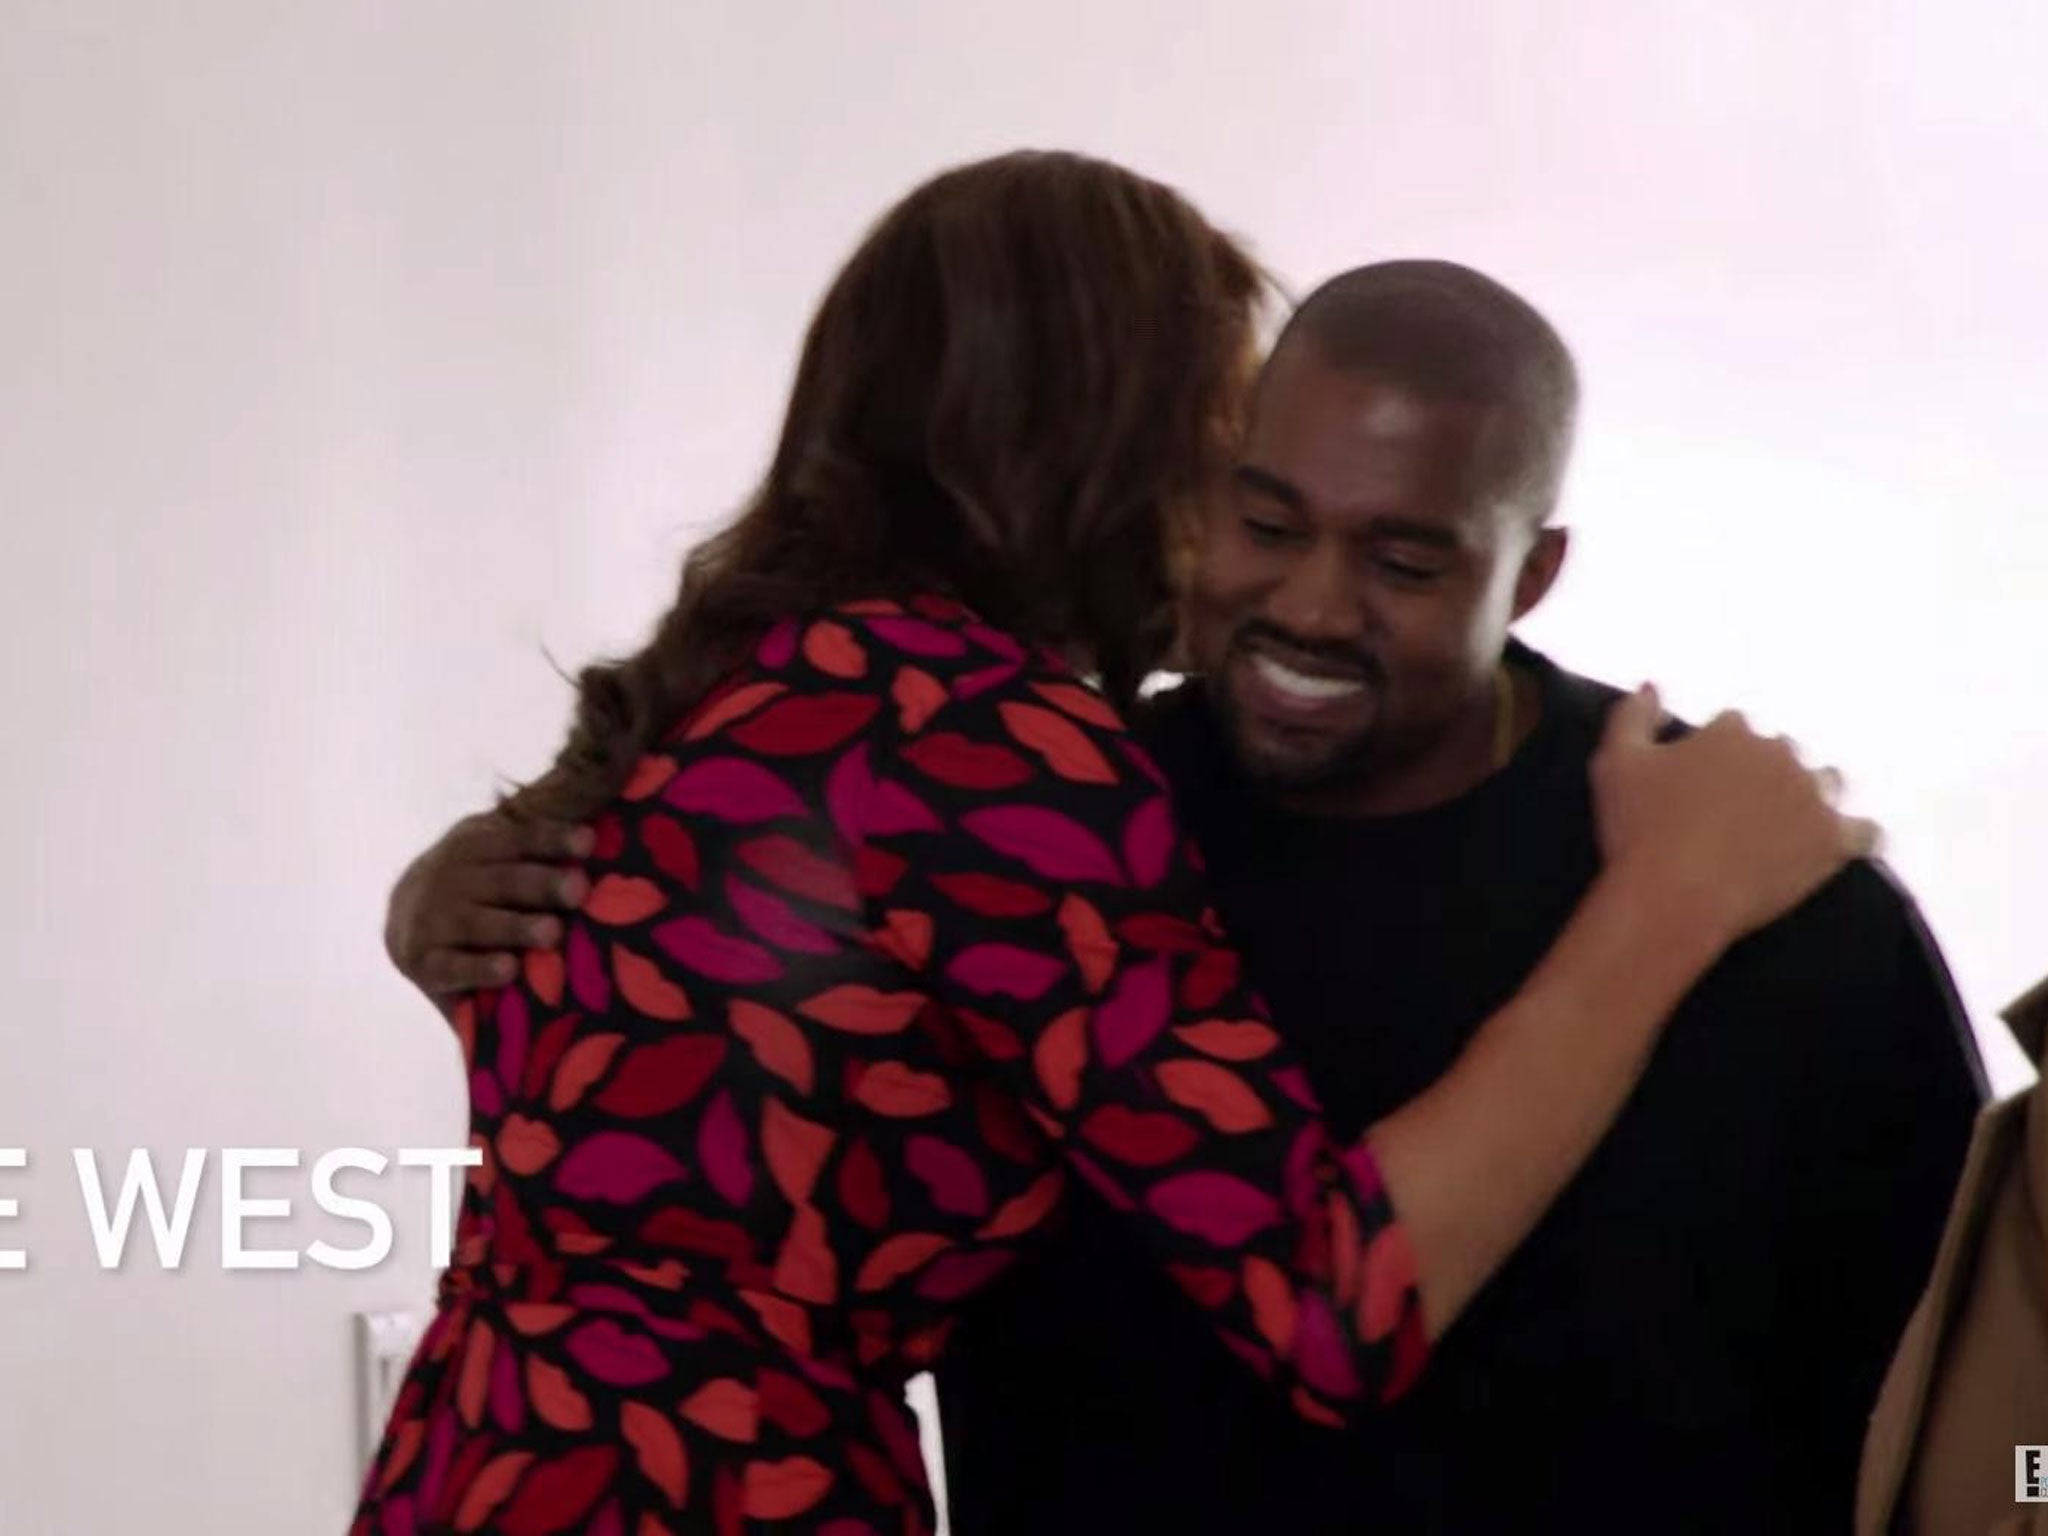 Cailtyn Jenner greets Kanye West in a segment for I am Cait